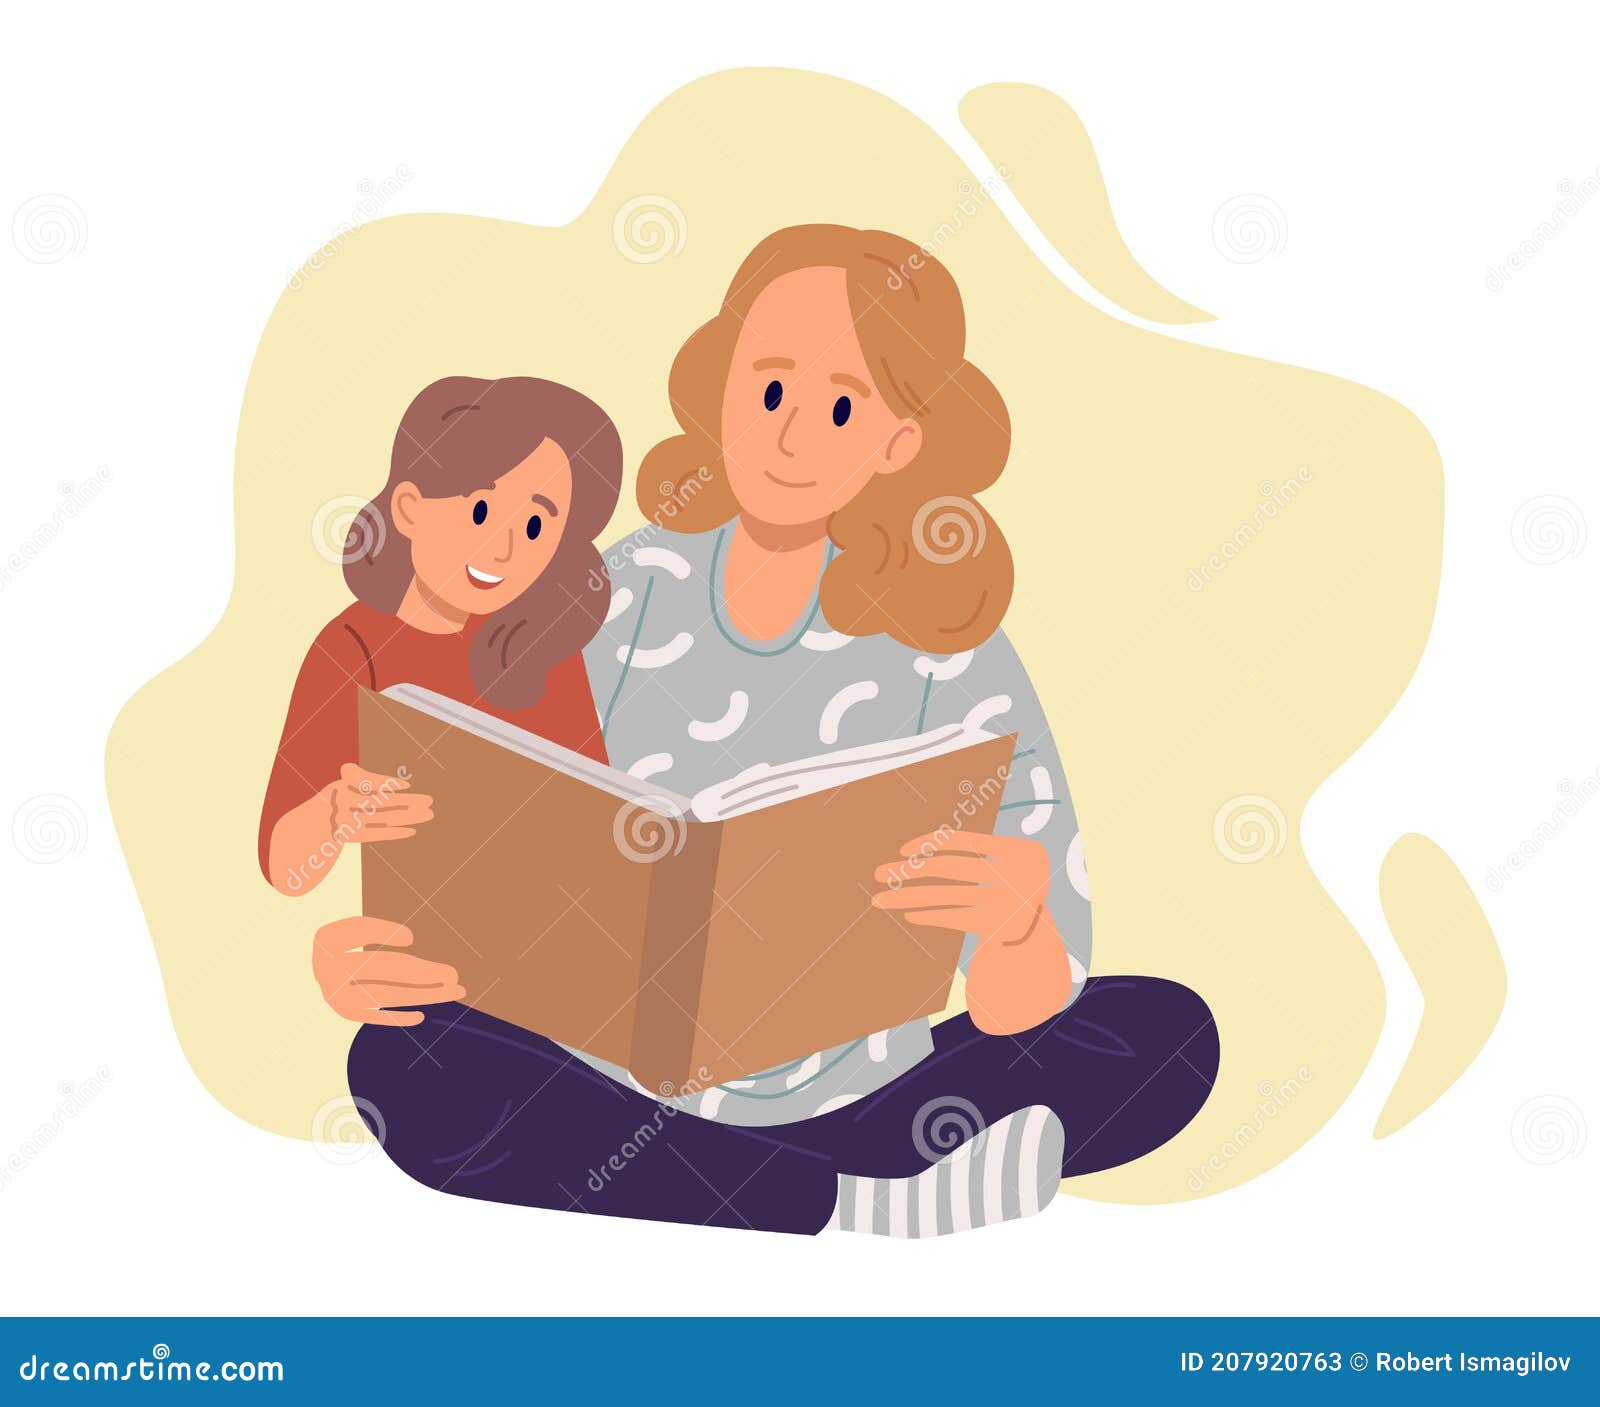 Mother With Daughter Reading A Book Flat Design Illustration Vector Stock Vector 